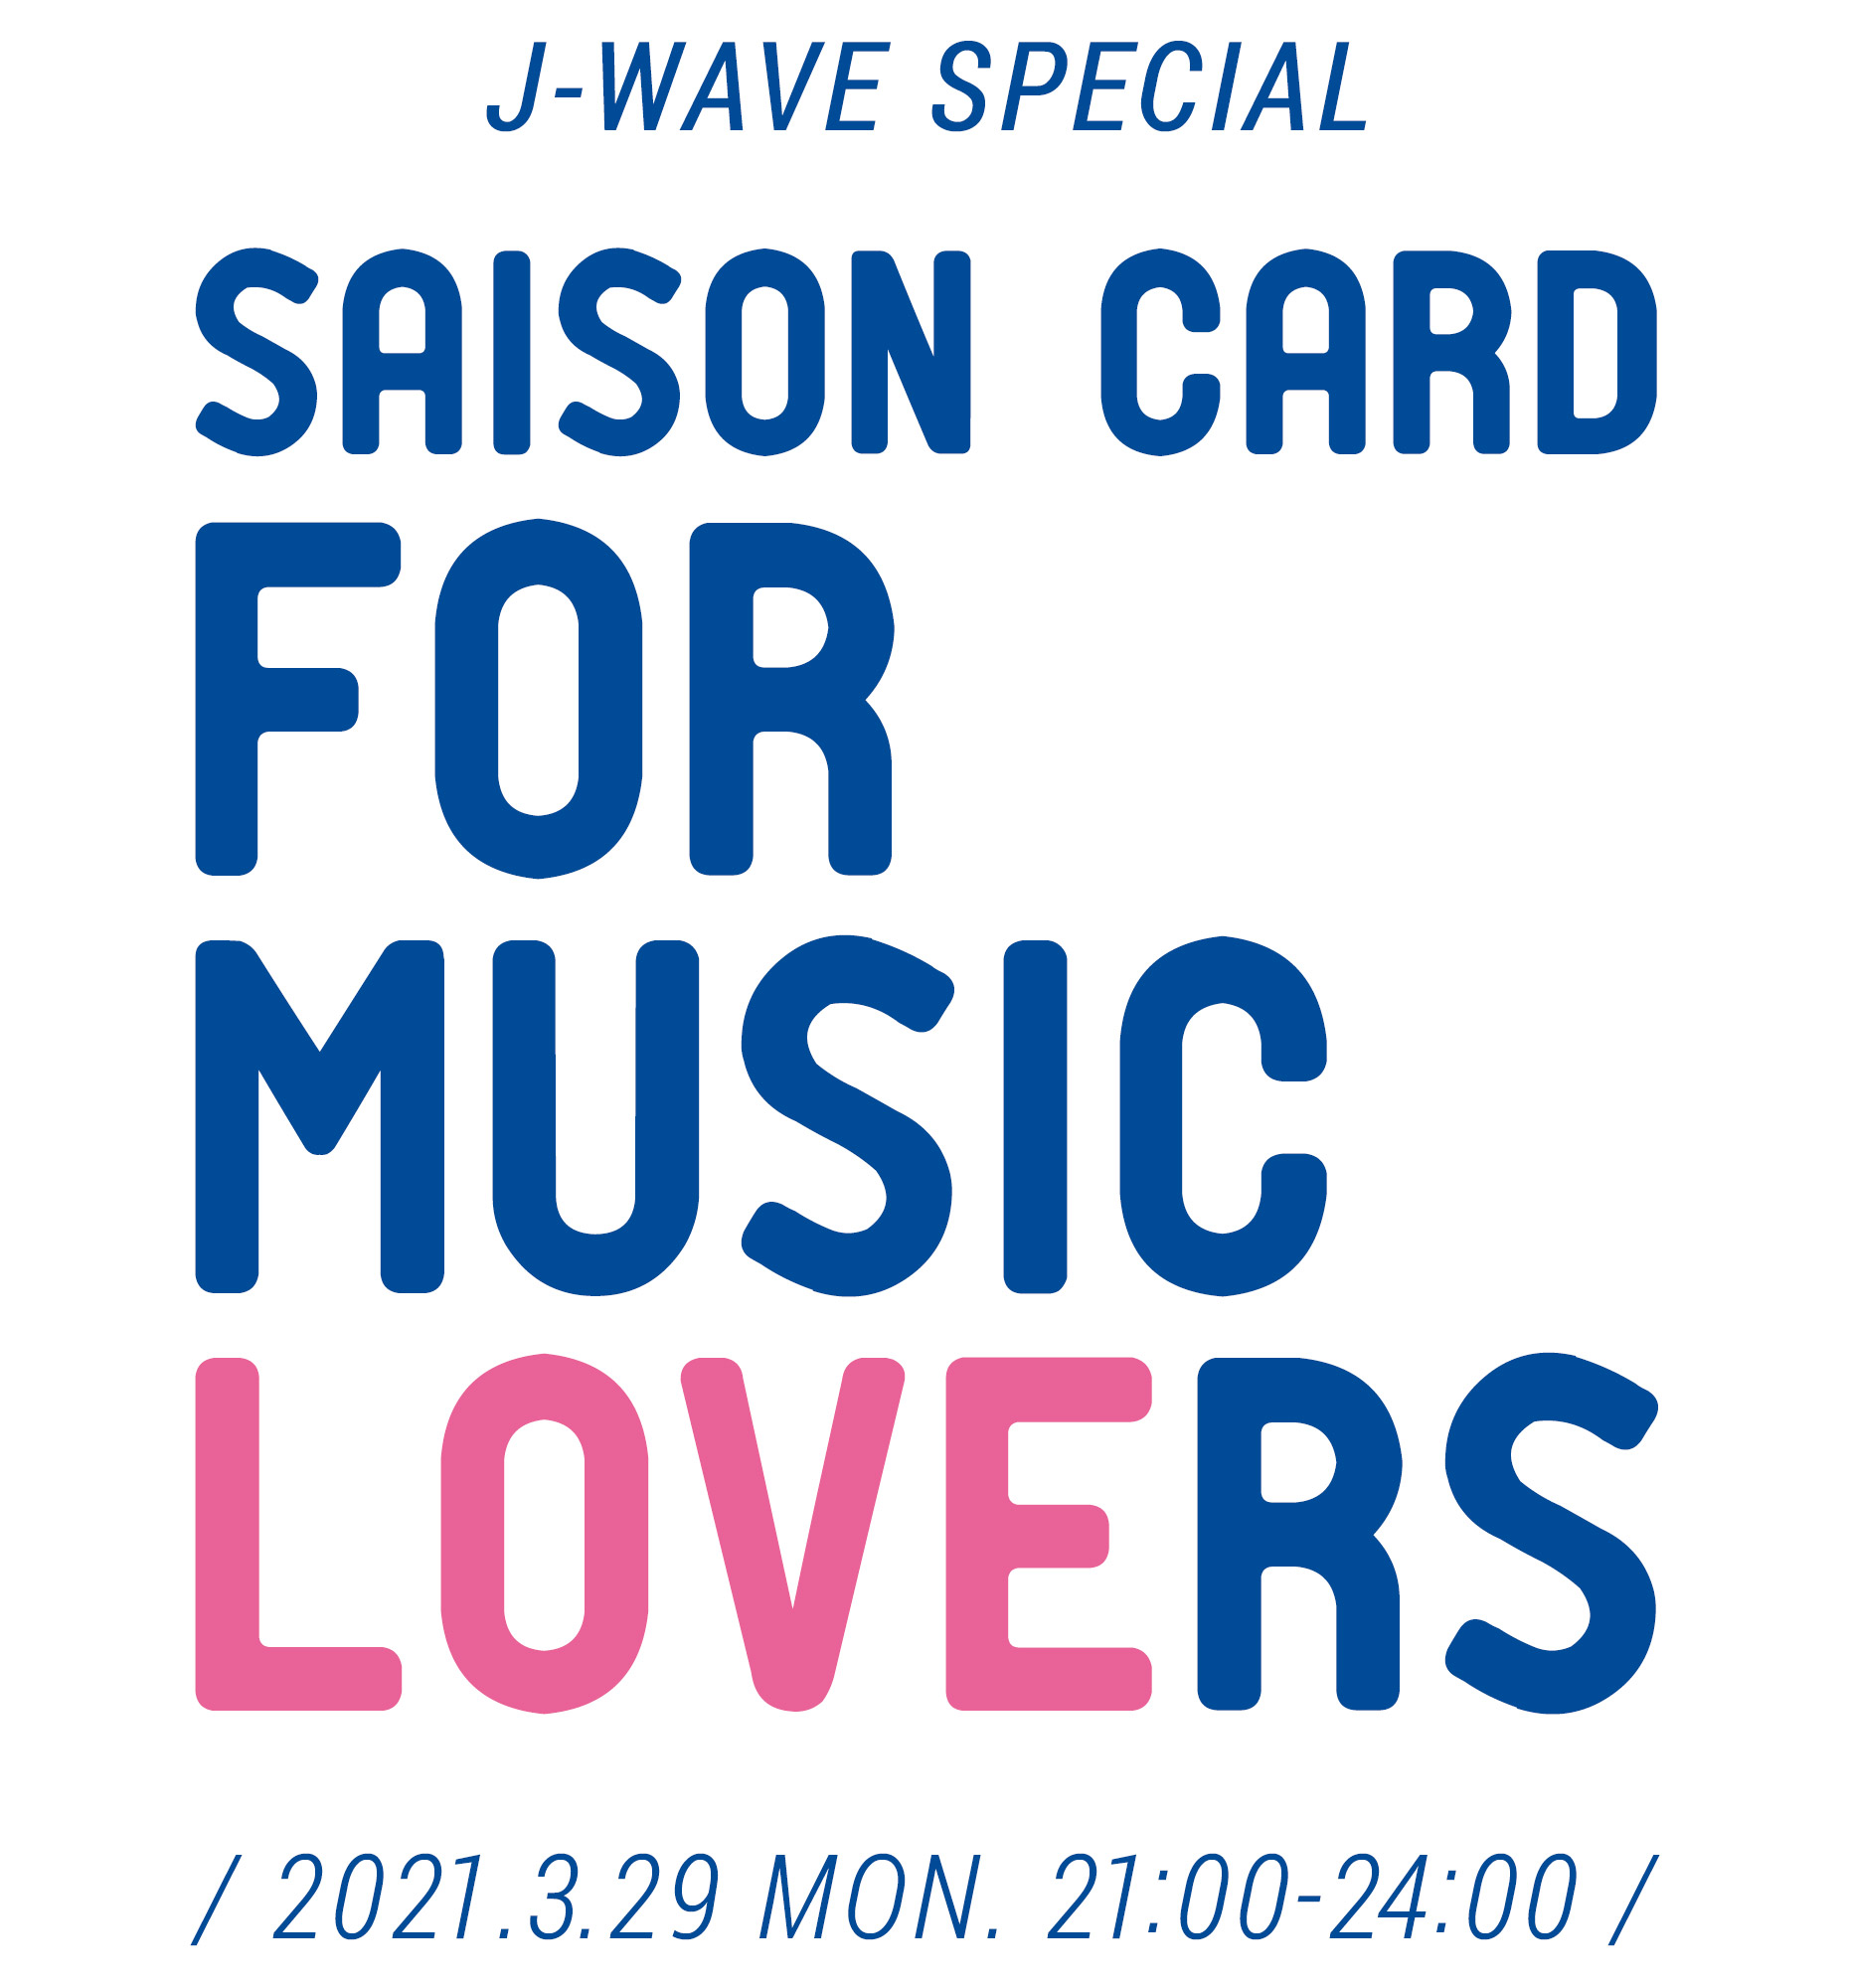 J-WAVE SPECIAL SAISON CARD FOR MUSIC LOVERS